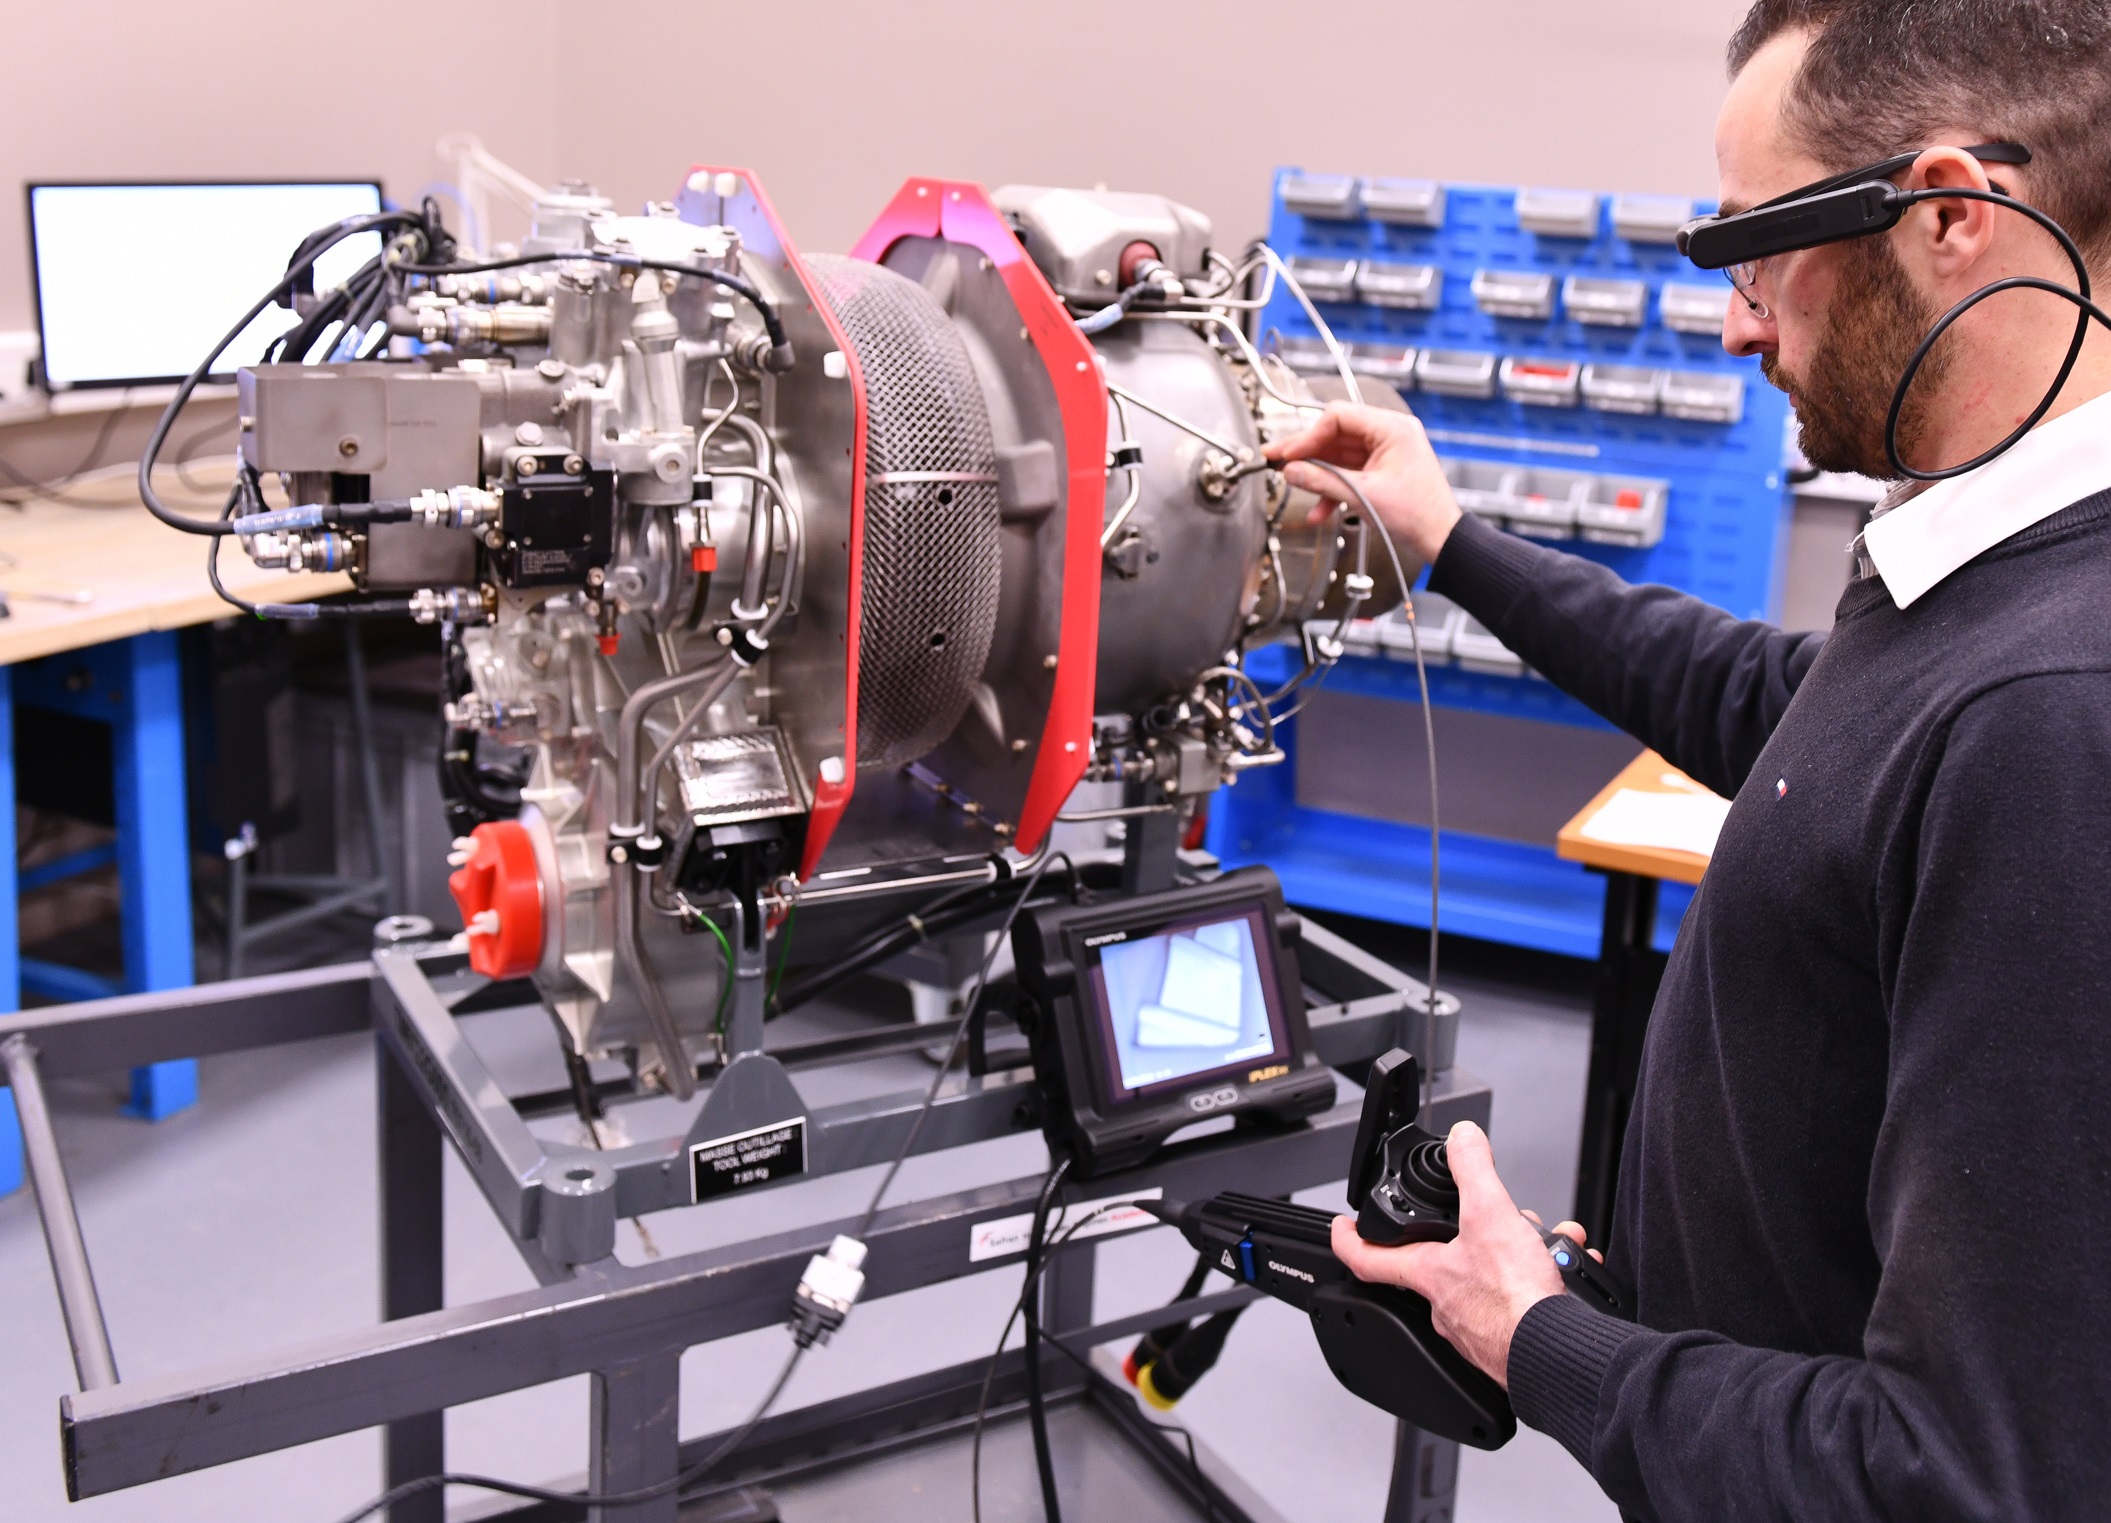 Safran Helicopter Engines Introduces Expert Link, New Remote Assistance Service